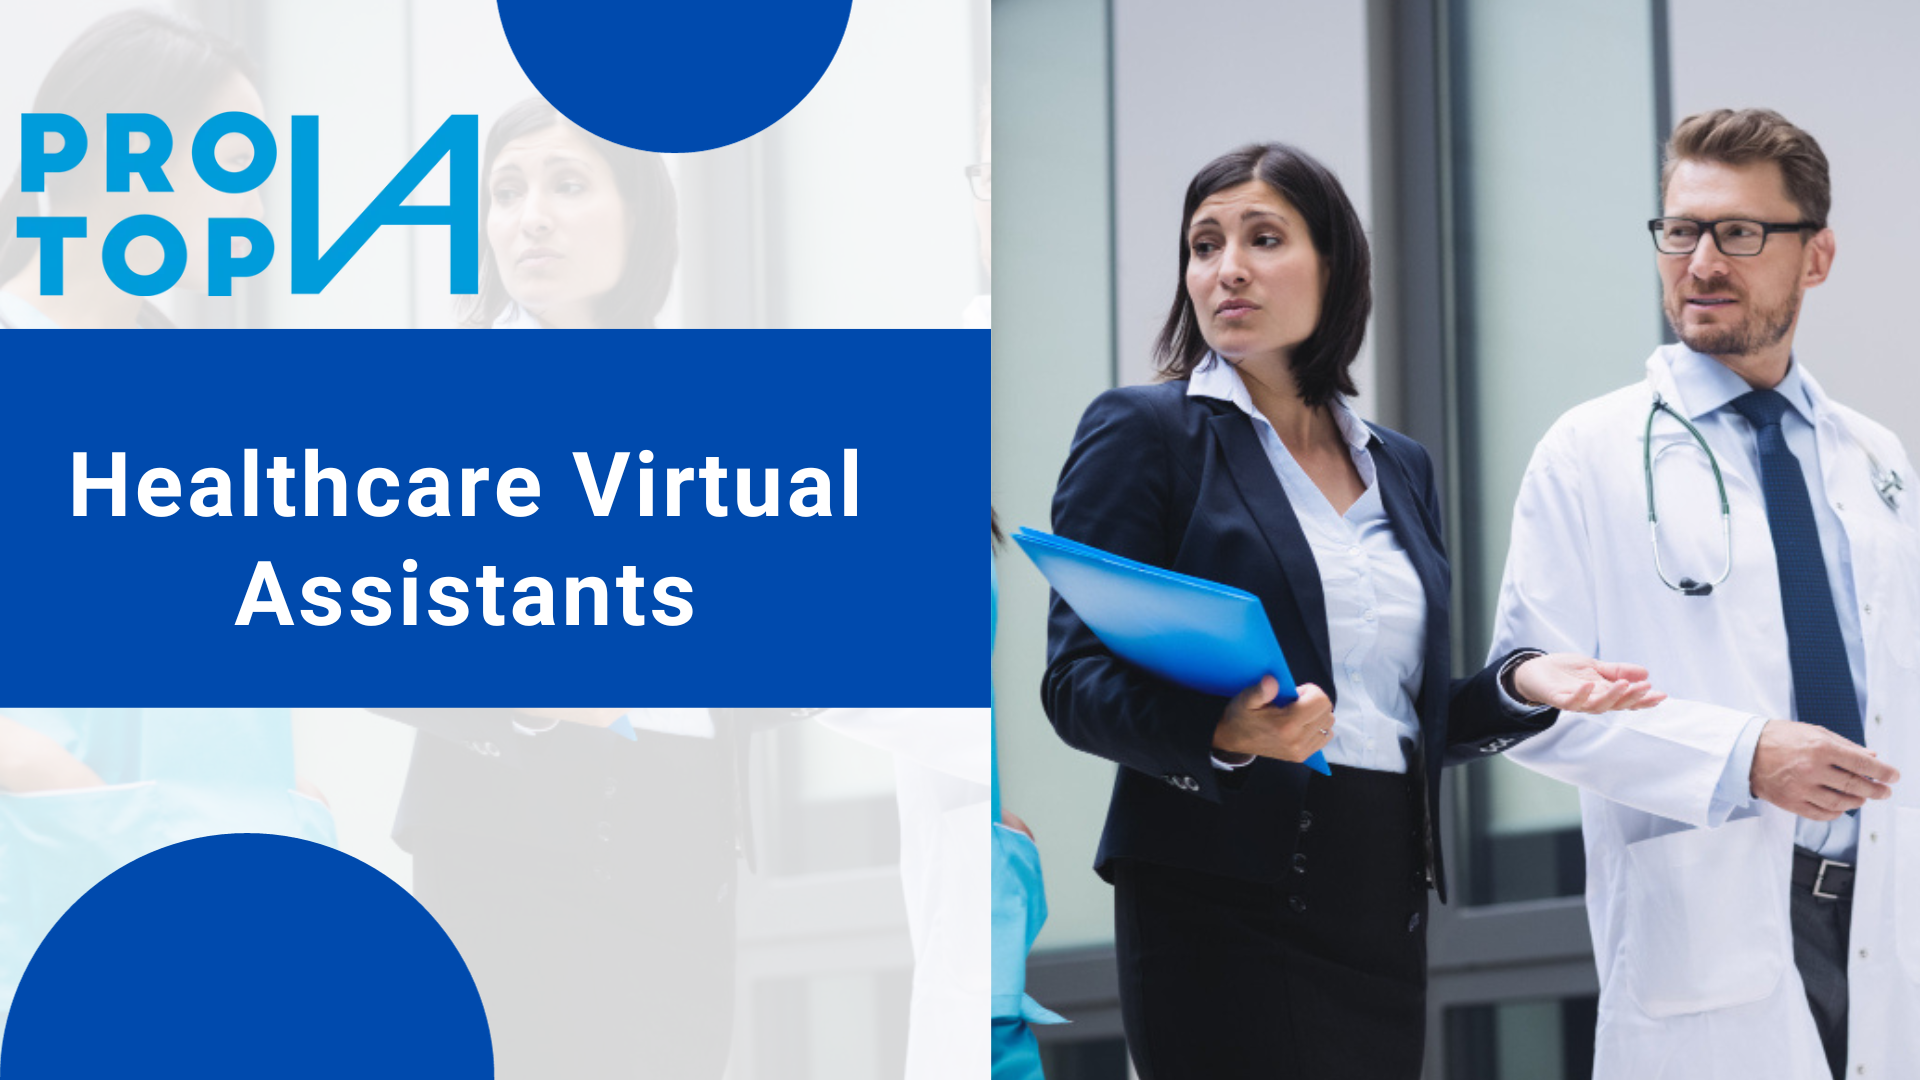 Healthcare services provided by virtual assistants.